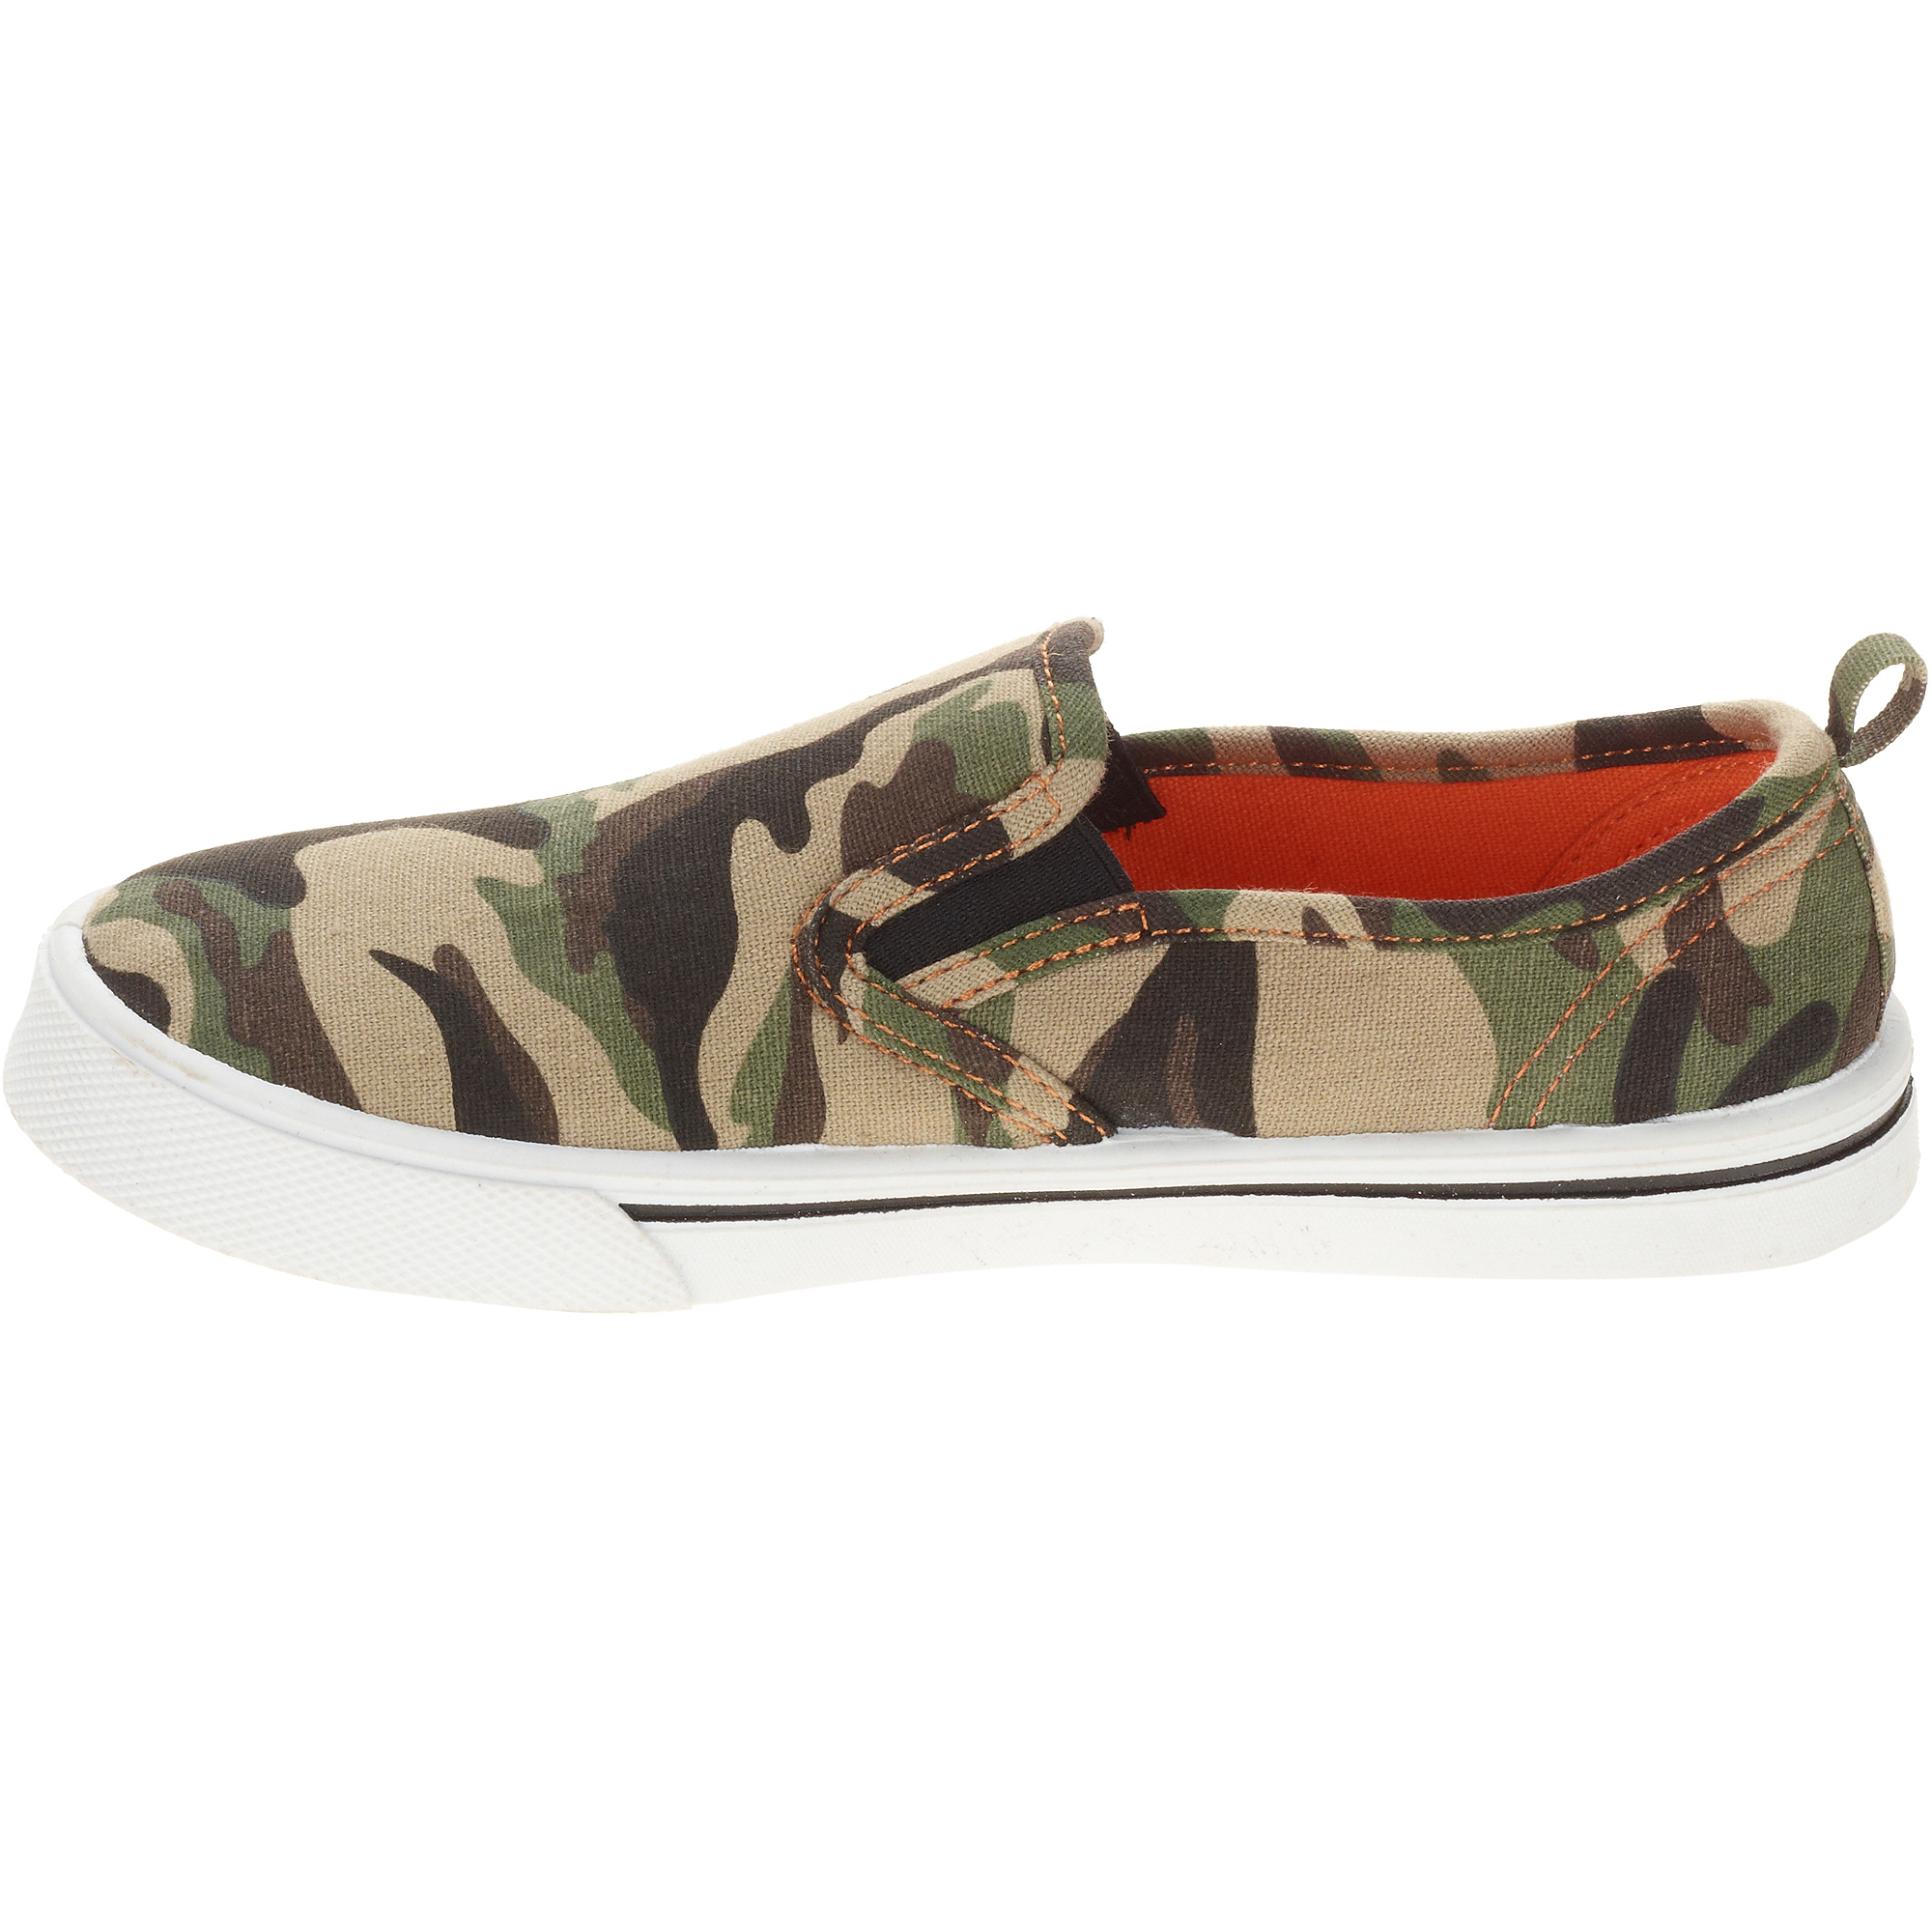 Boy's Casual Canvas Slip-on Shoe - image 3 of 5